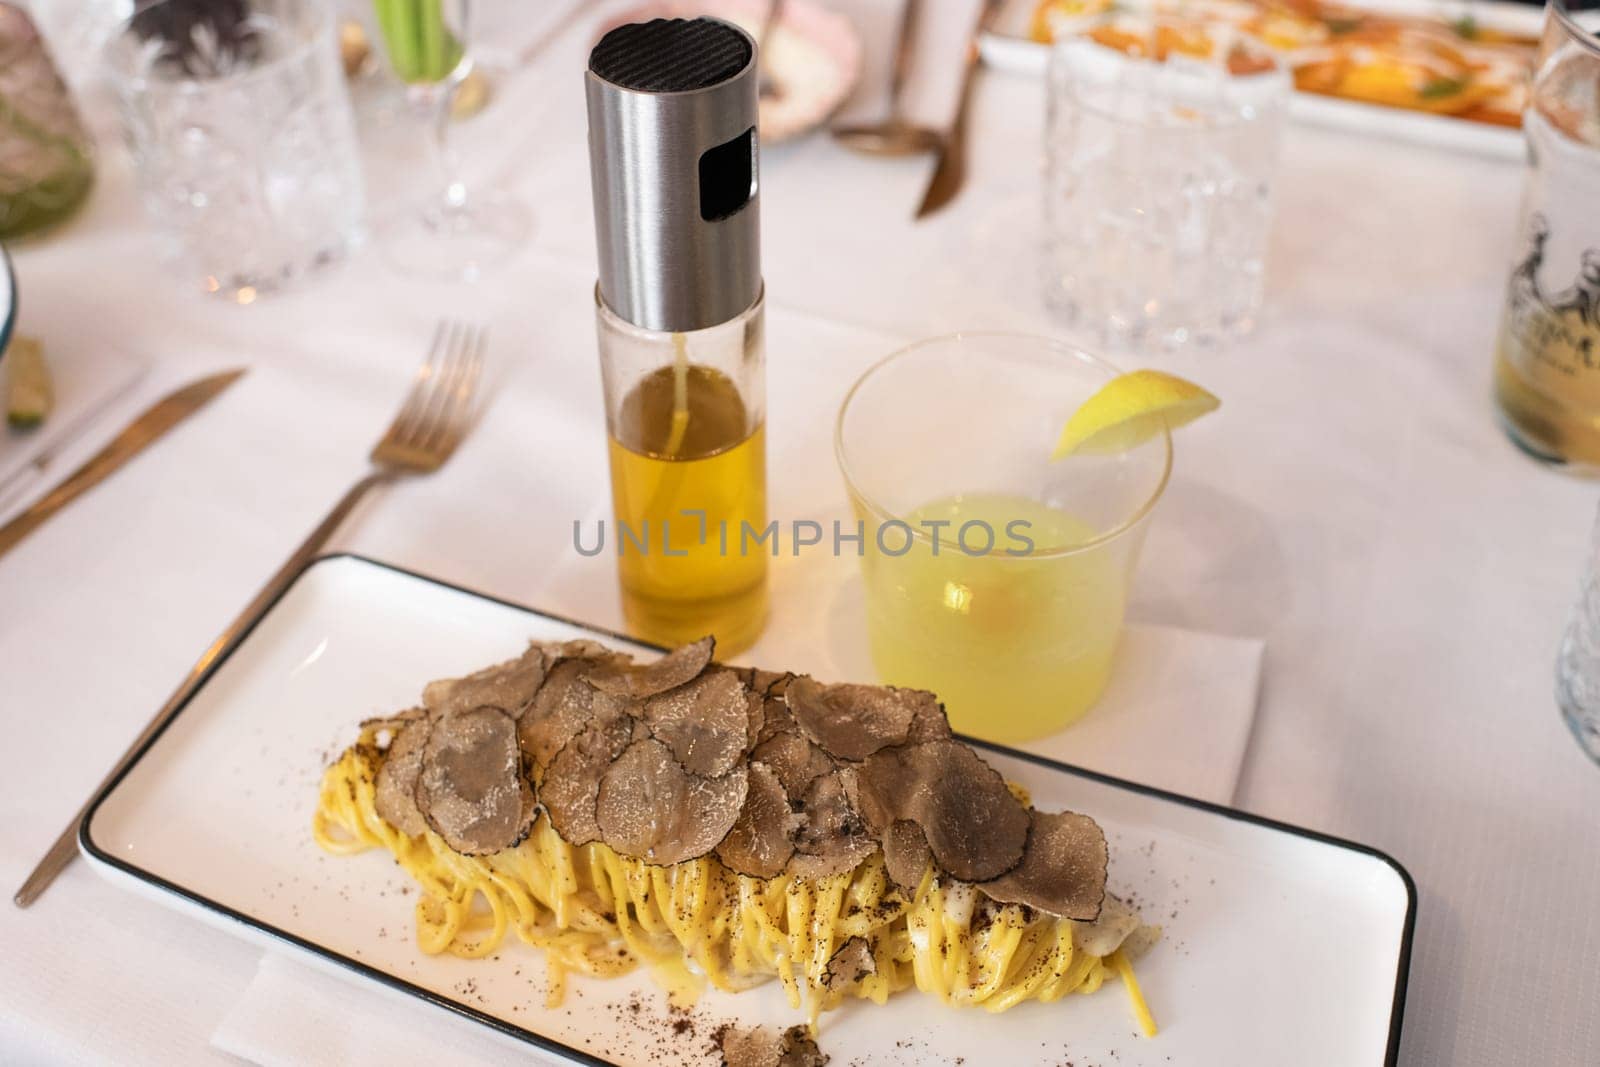 Italian pasta with truffle mushrooms and limoncello in a restaurant